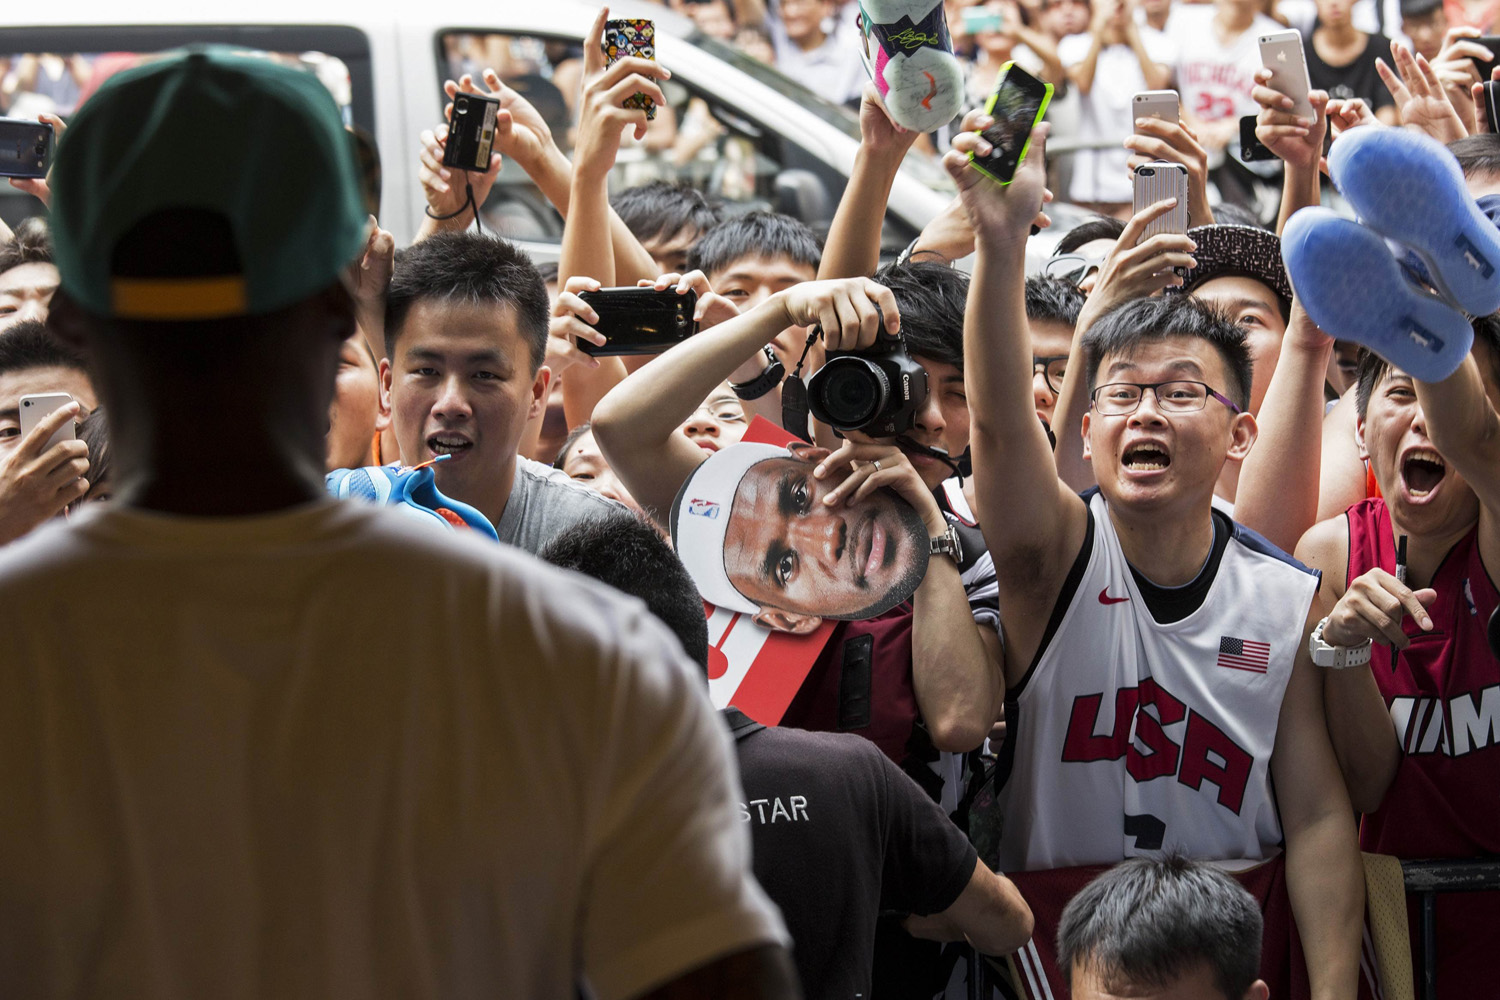 Fans wave and yell at LeBron James during a promotional event in Hong Kong